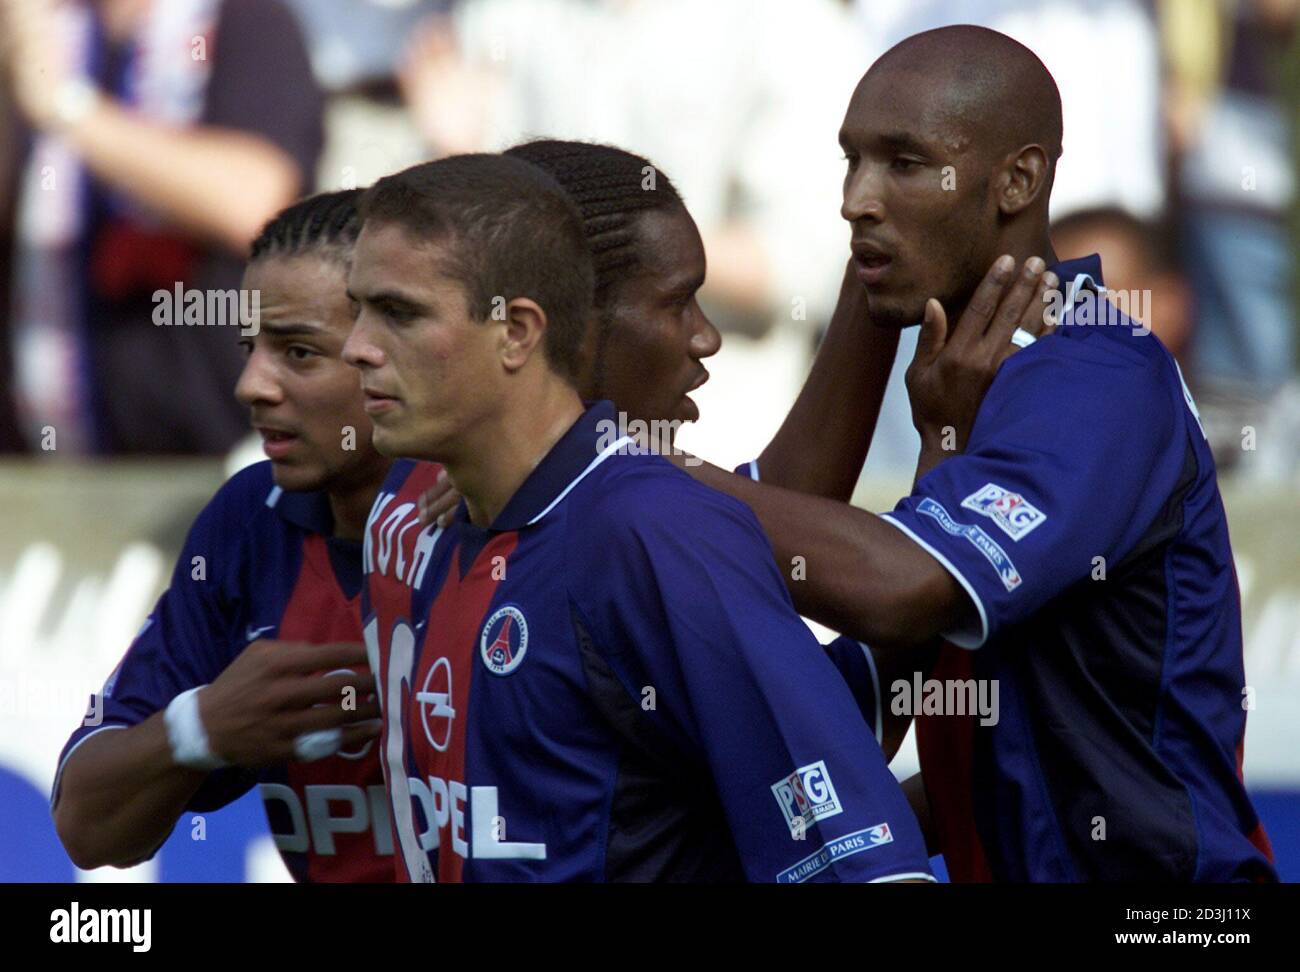 Paris Saint Germain Striker Nicolas Anelka R Is Congratulated By Jay Jay Okocha C Christian Of Brazil L And Laurent Robert After Opening The Score For His Team Against Saint Etienne In Their French First